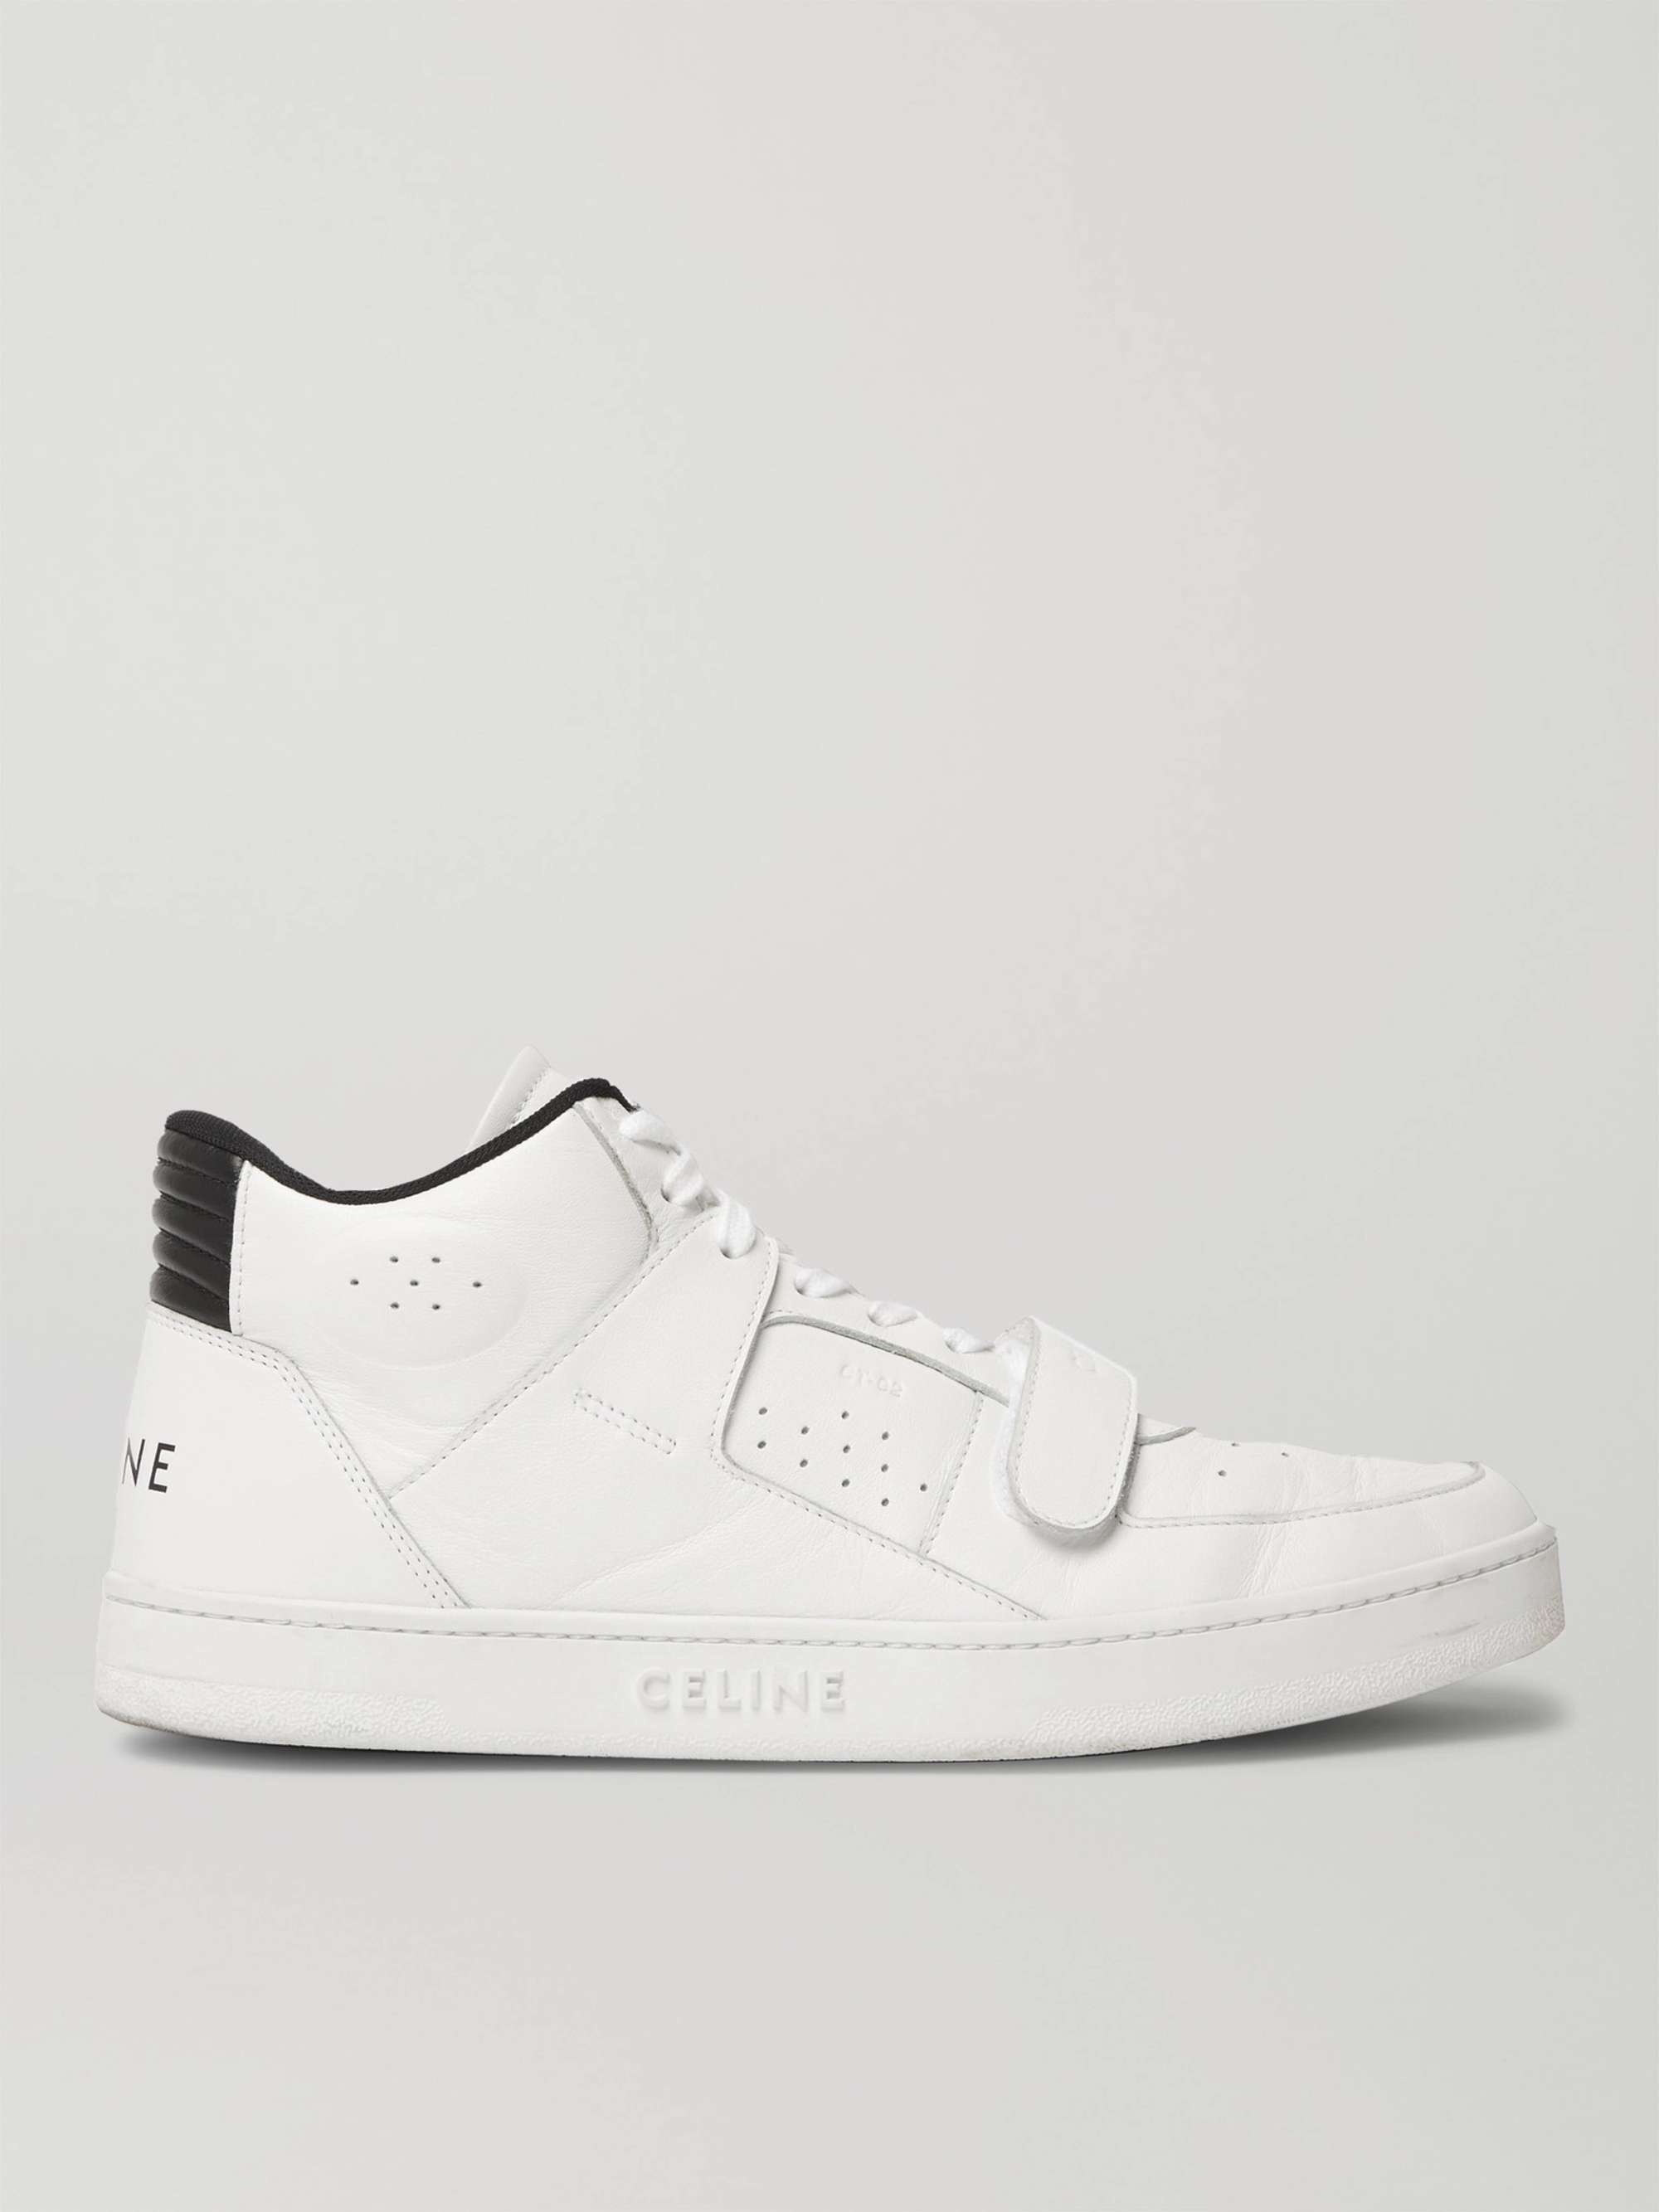 CELINE HOMME CT-02 Leather High-Top Sneakers for Men | MR PORTER